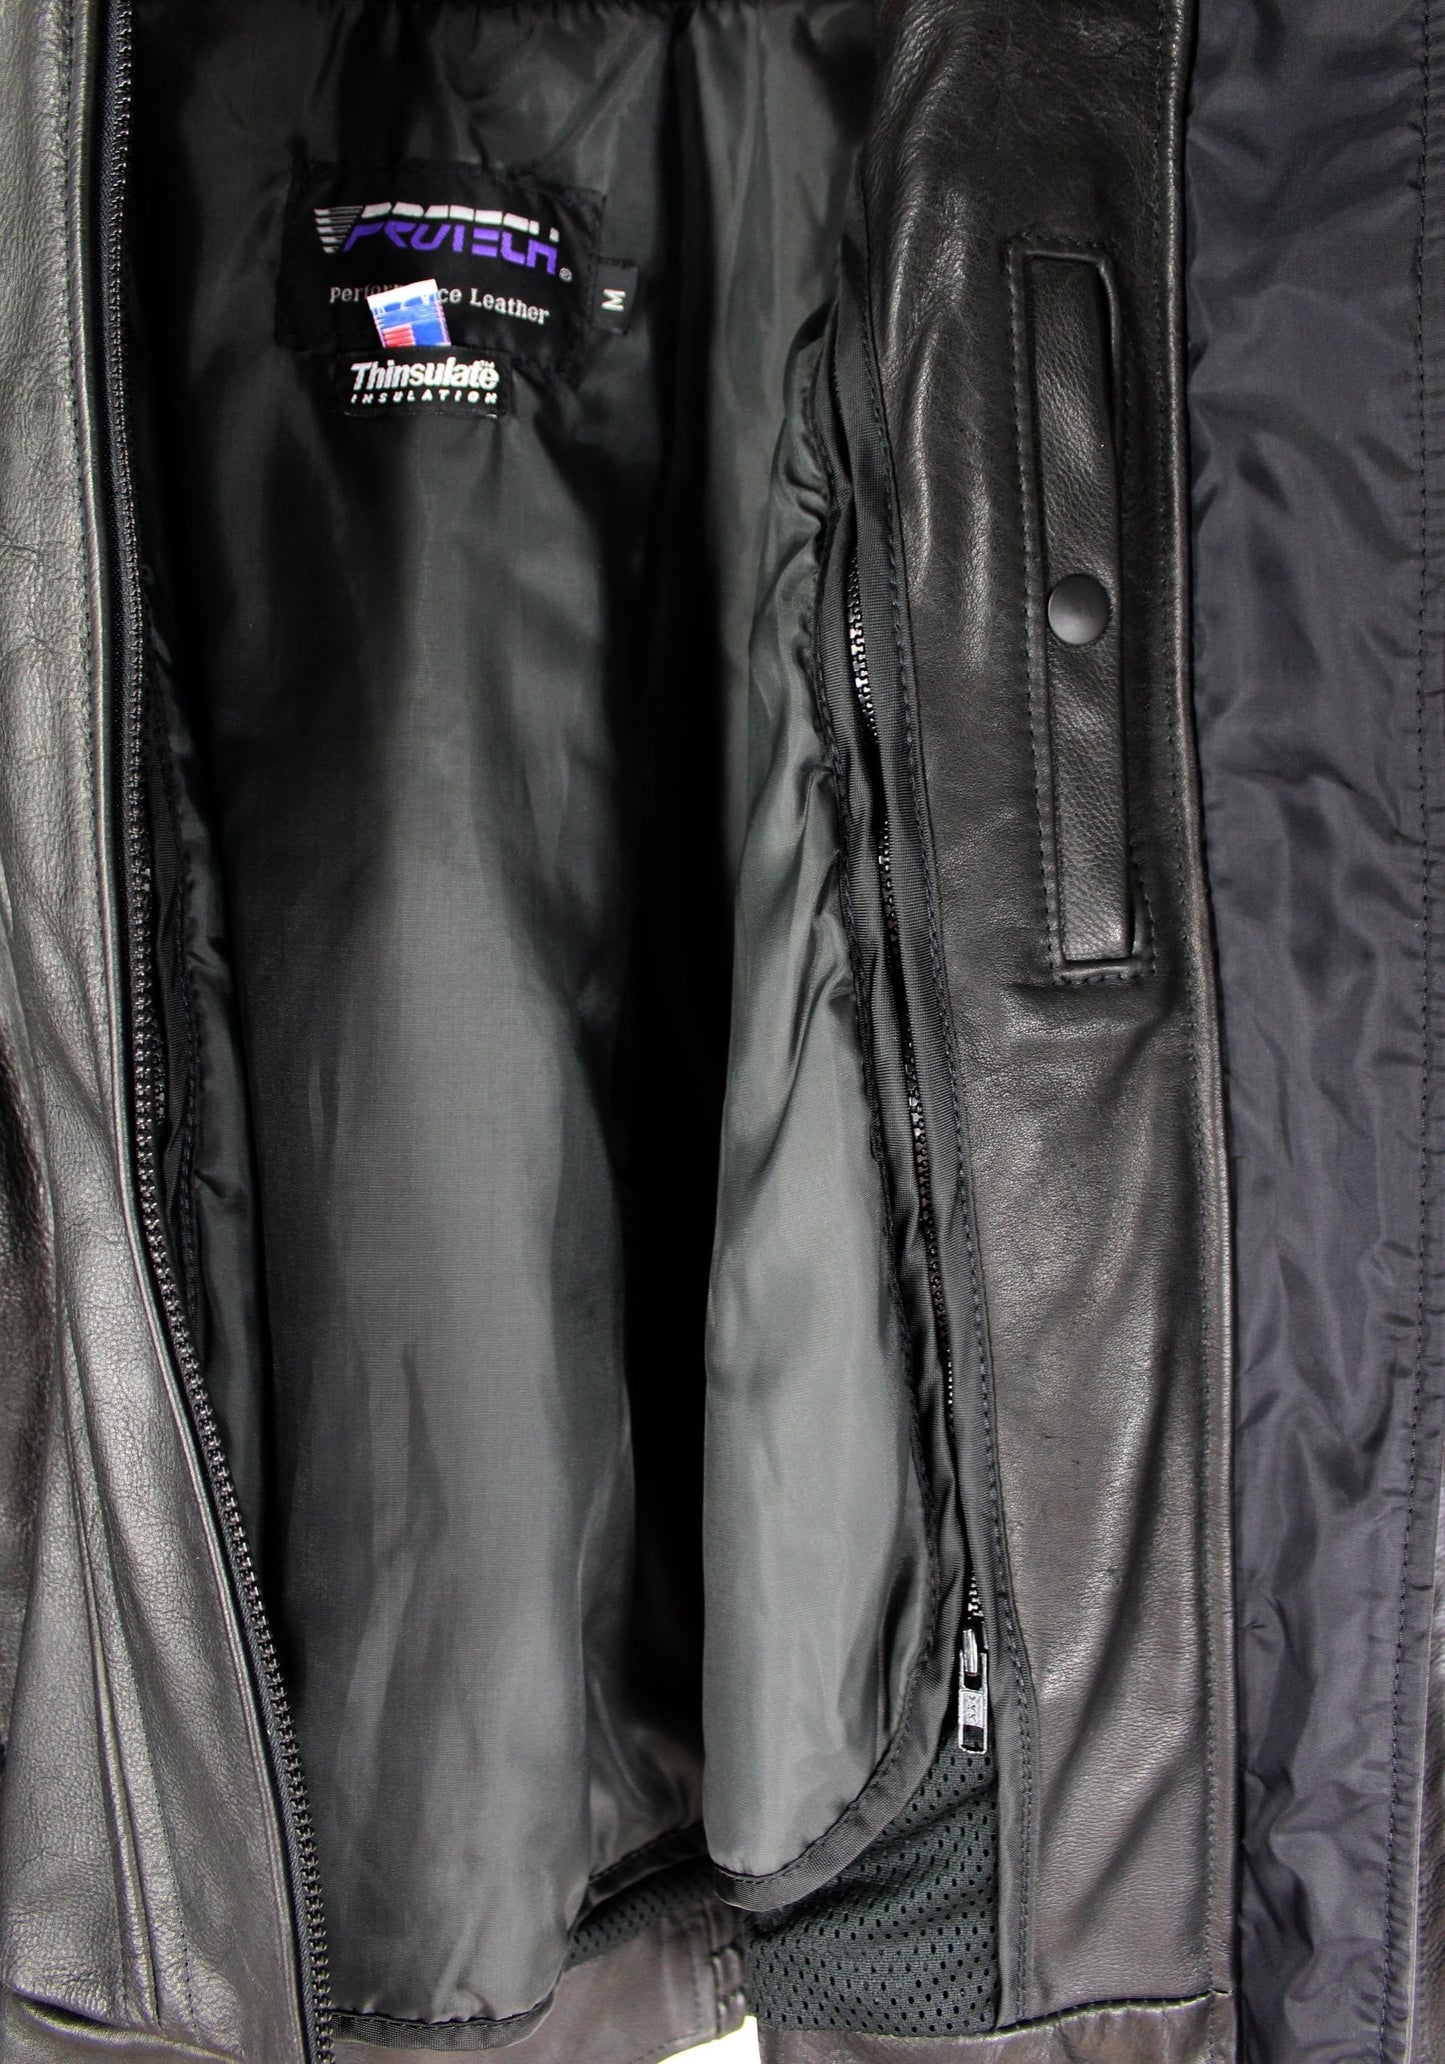 Protech USA Performance Leather Black Motorcycle Jacket M Vintage - Thinsulate Lining  excellent condition quality